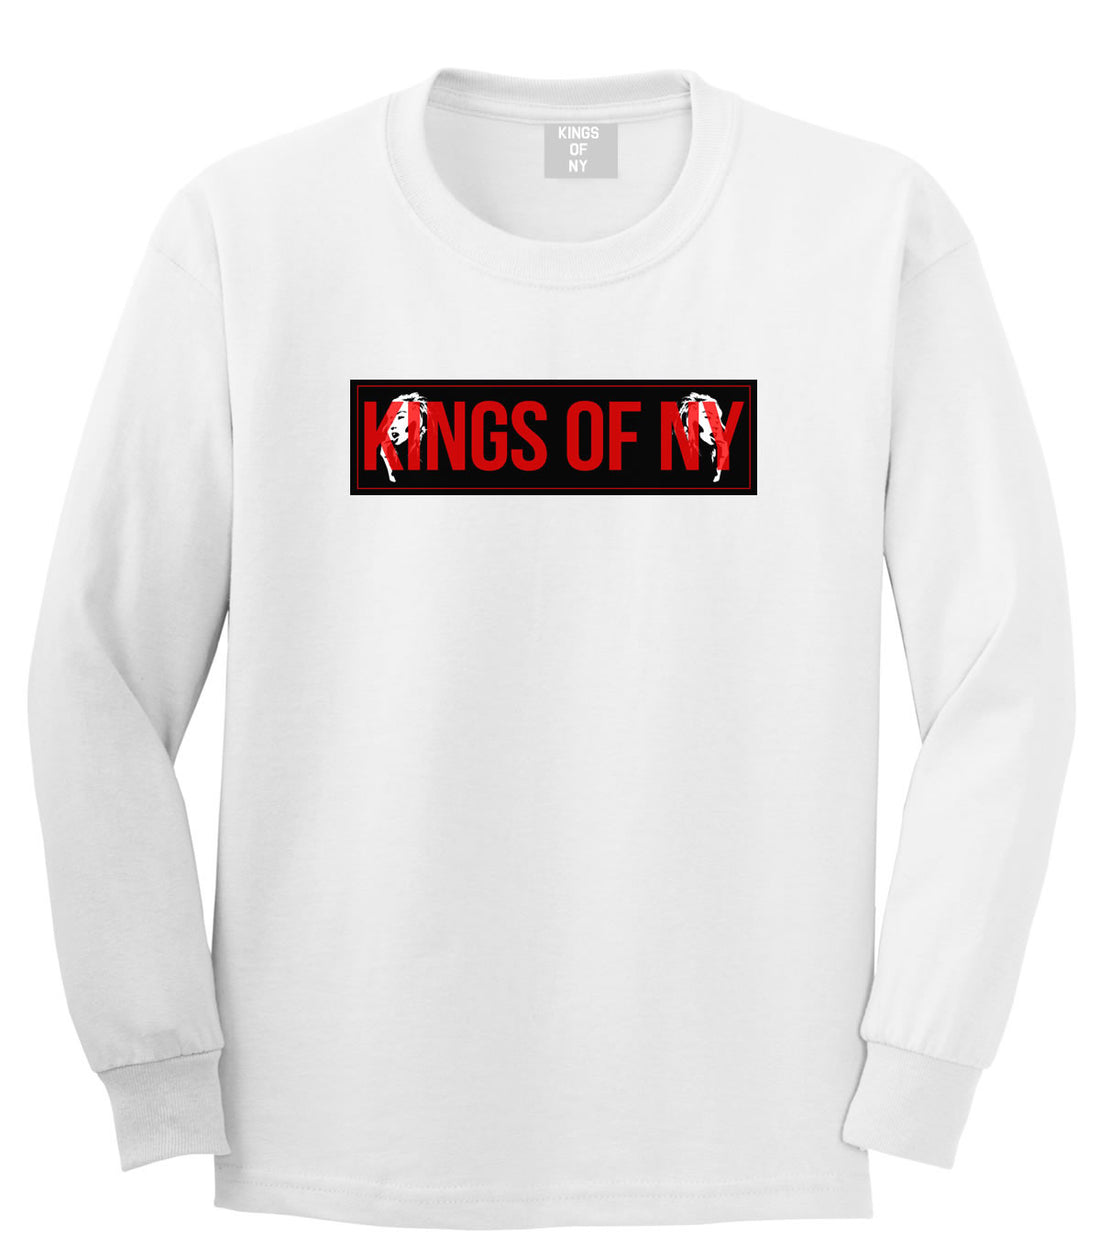 Red Girl Logo Print Long Sleeve T-Shirt in White by Kings Of NY